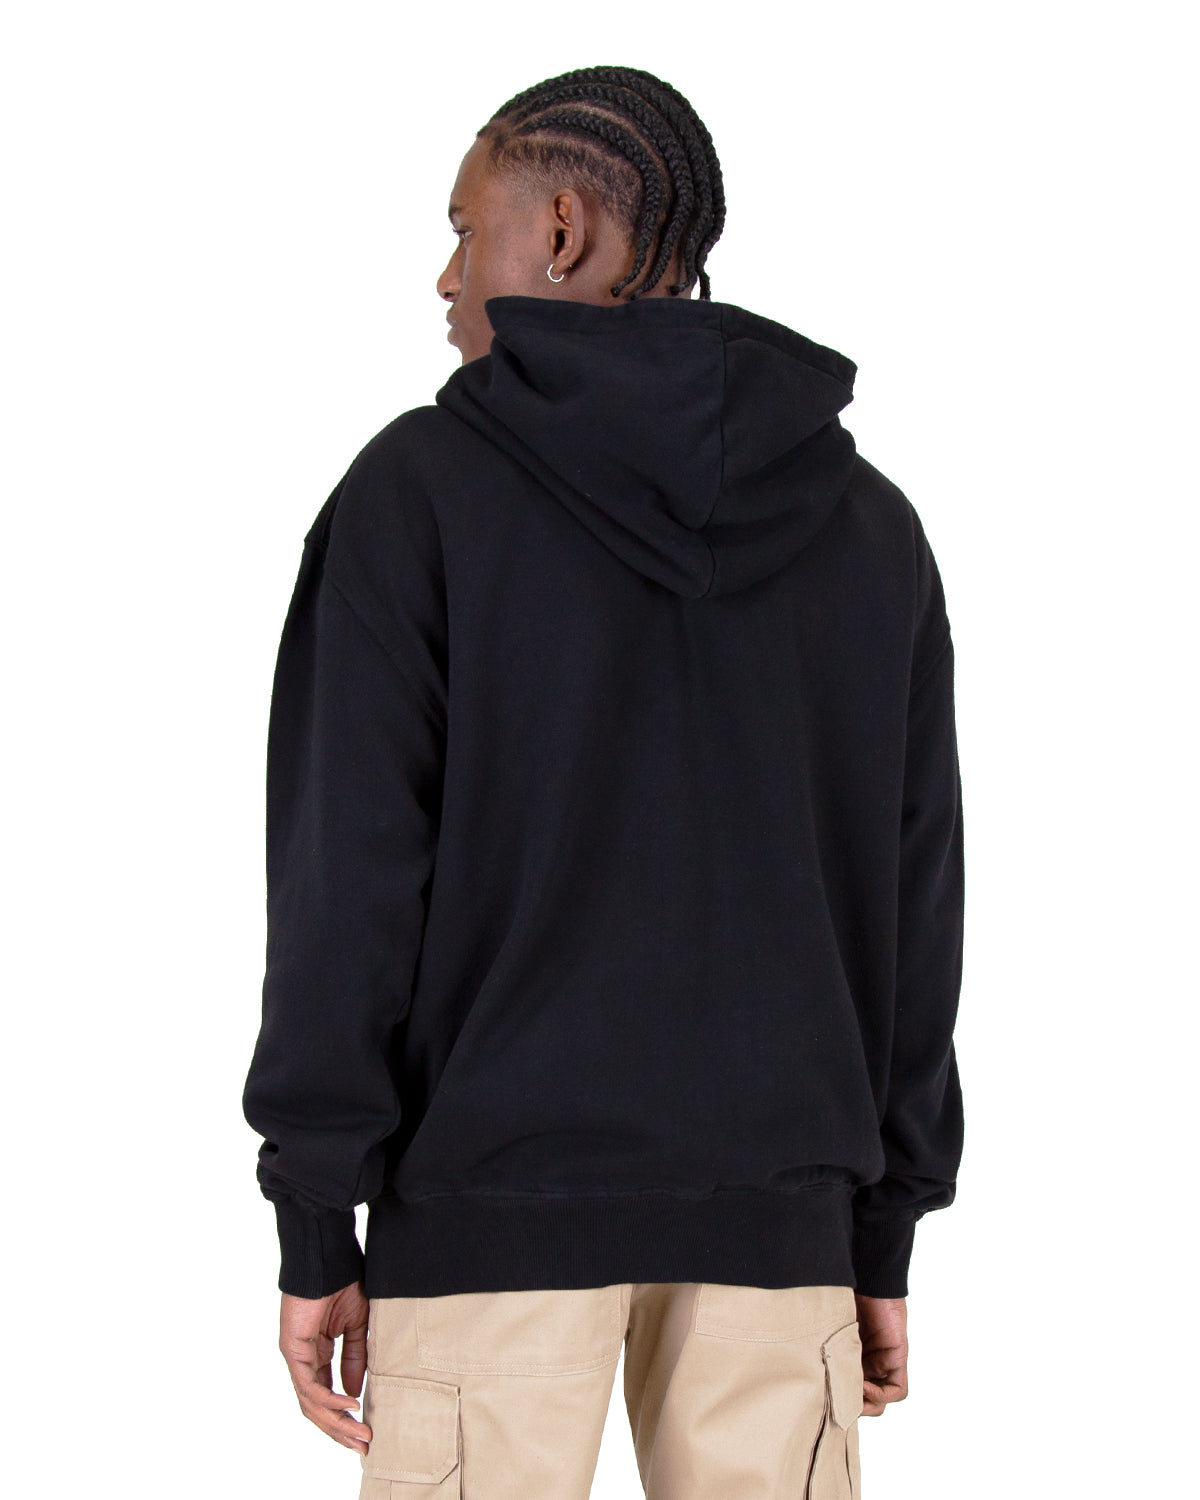 Black Circle Double-Face Jersey Zip-Up Hoodie